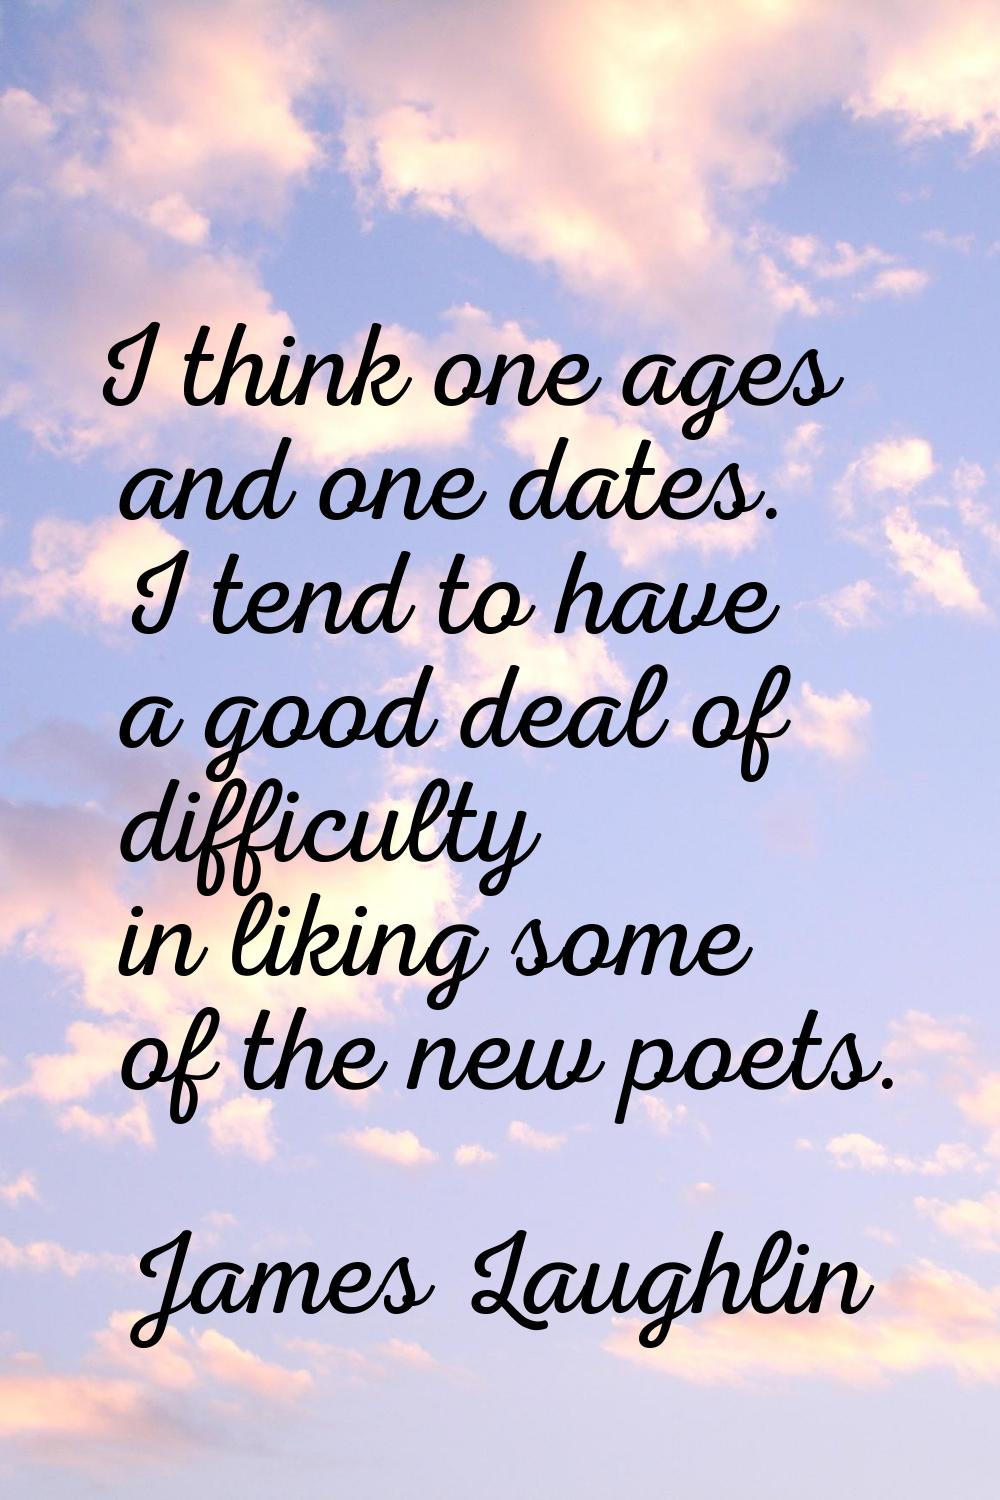 I think one ages and one dates. I tend to have a good deal of difficulty in liking some of the new 